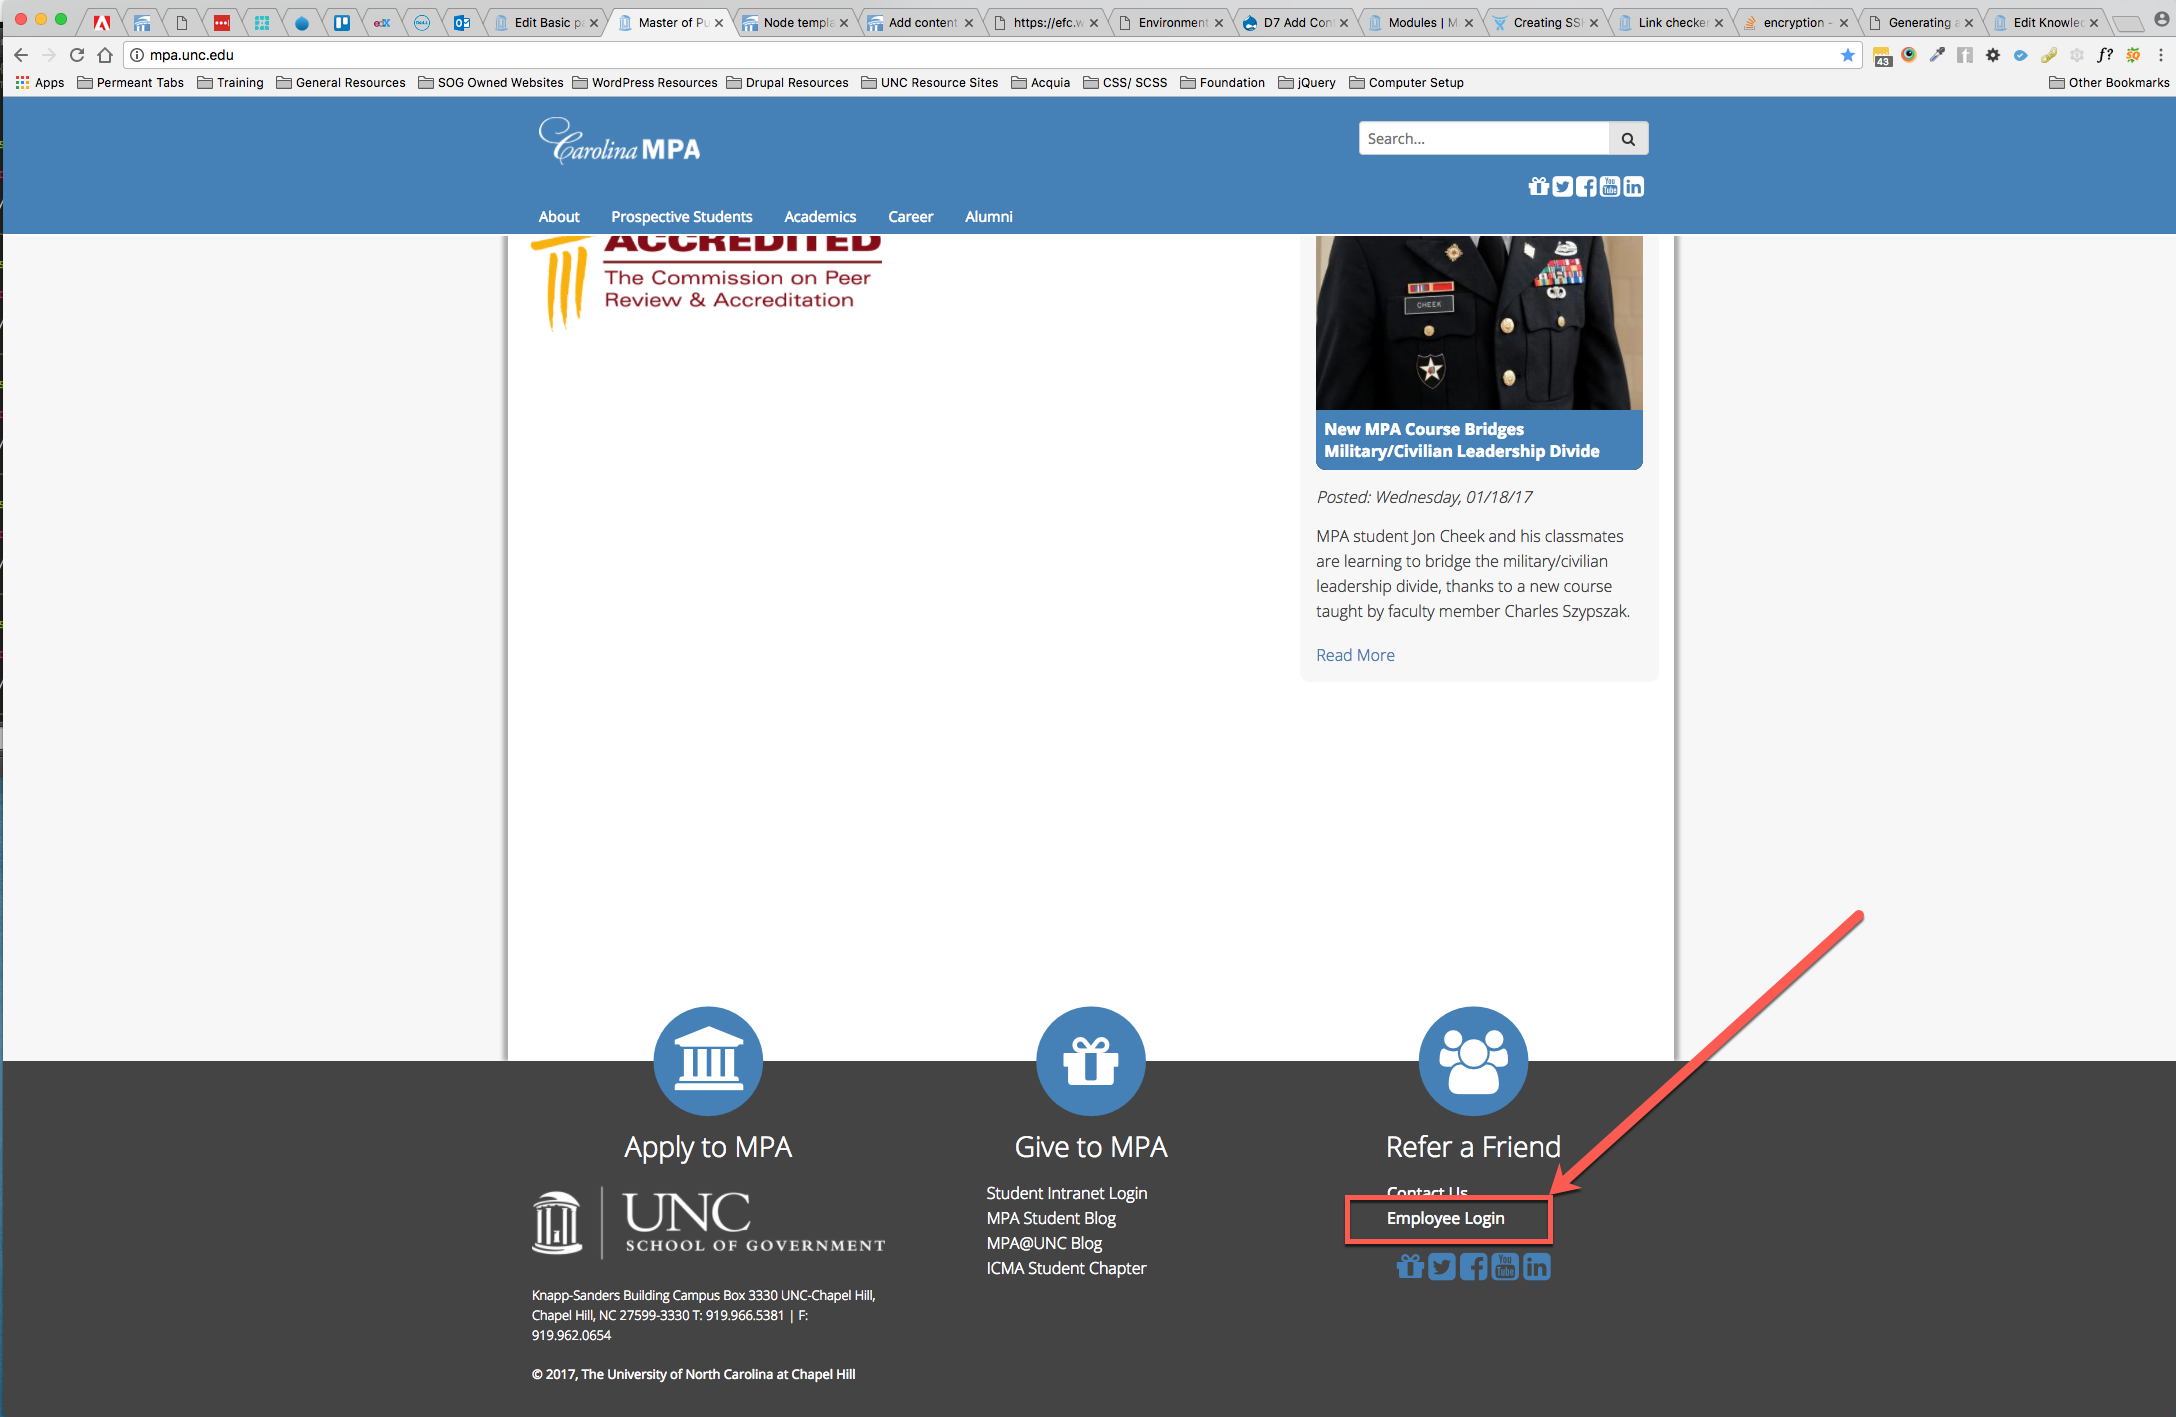 Displays the employee login link at the bottom the MPA site.